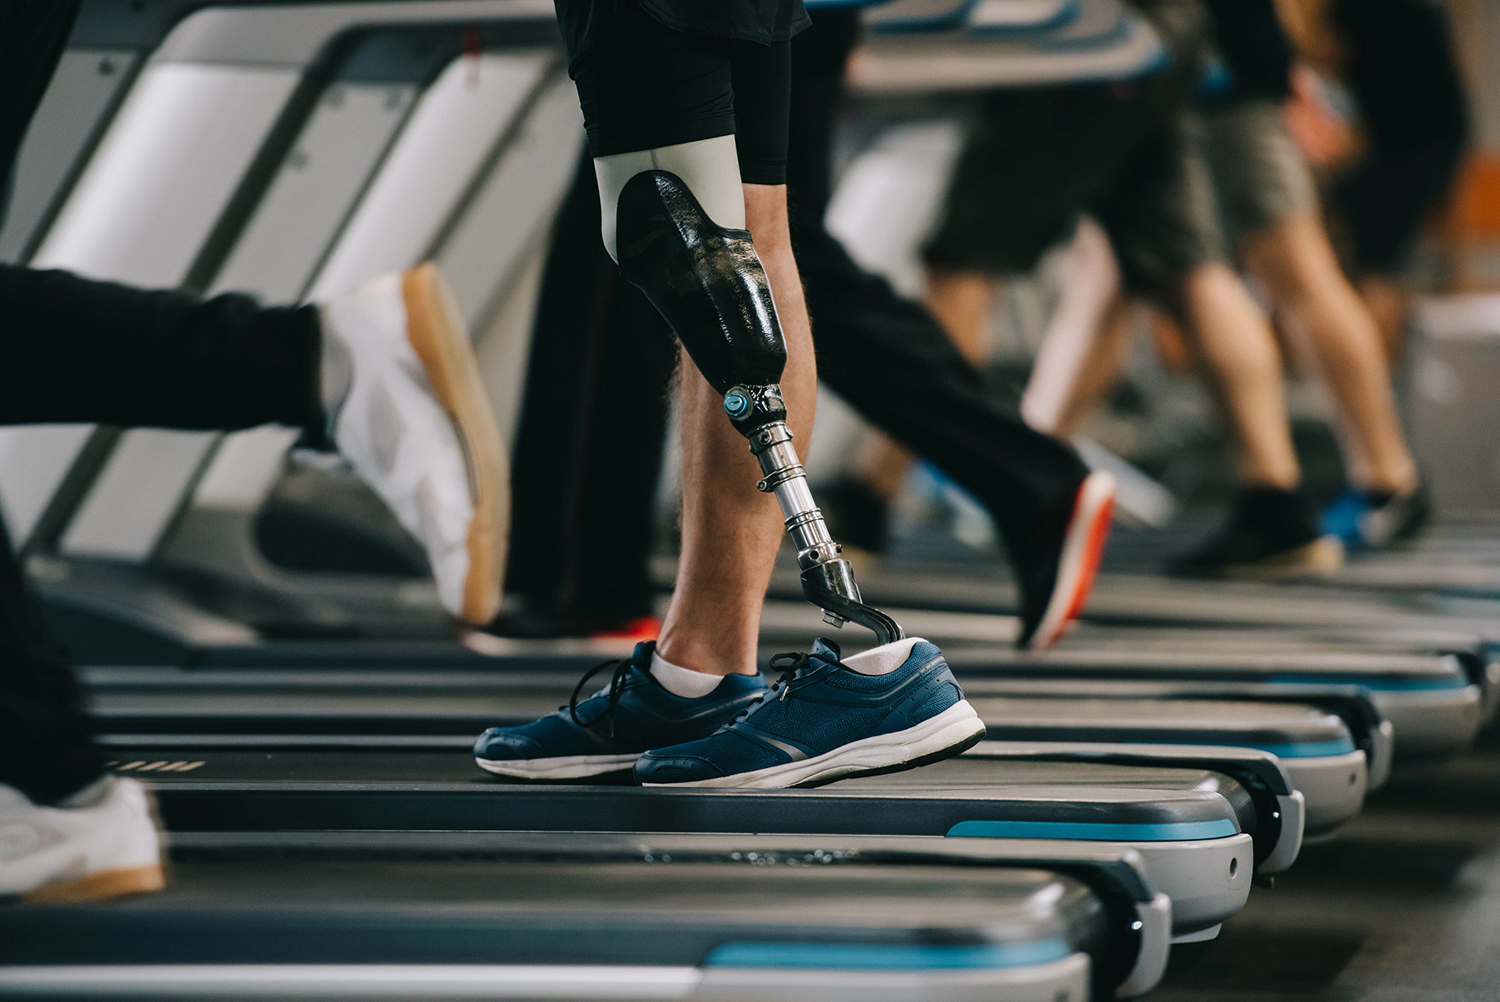 Modern prosthetic legs are manufactured from lightweight materials that enable easier walking, and for some, can even make activities like running possible. (Image Source: AdobeStock_232970923)